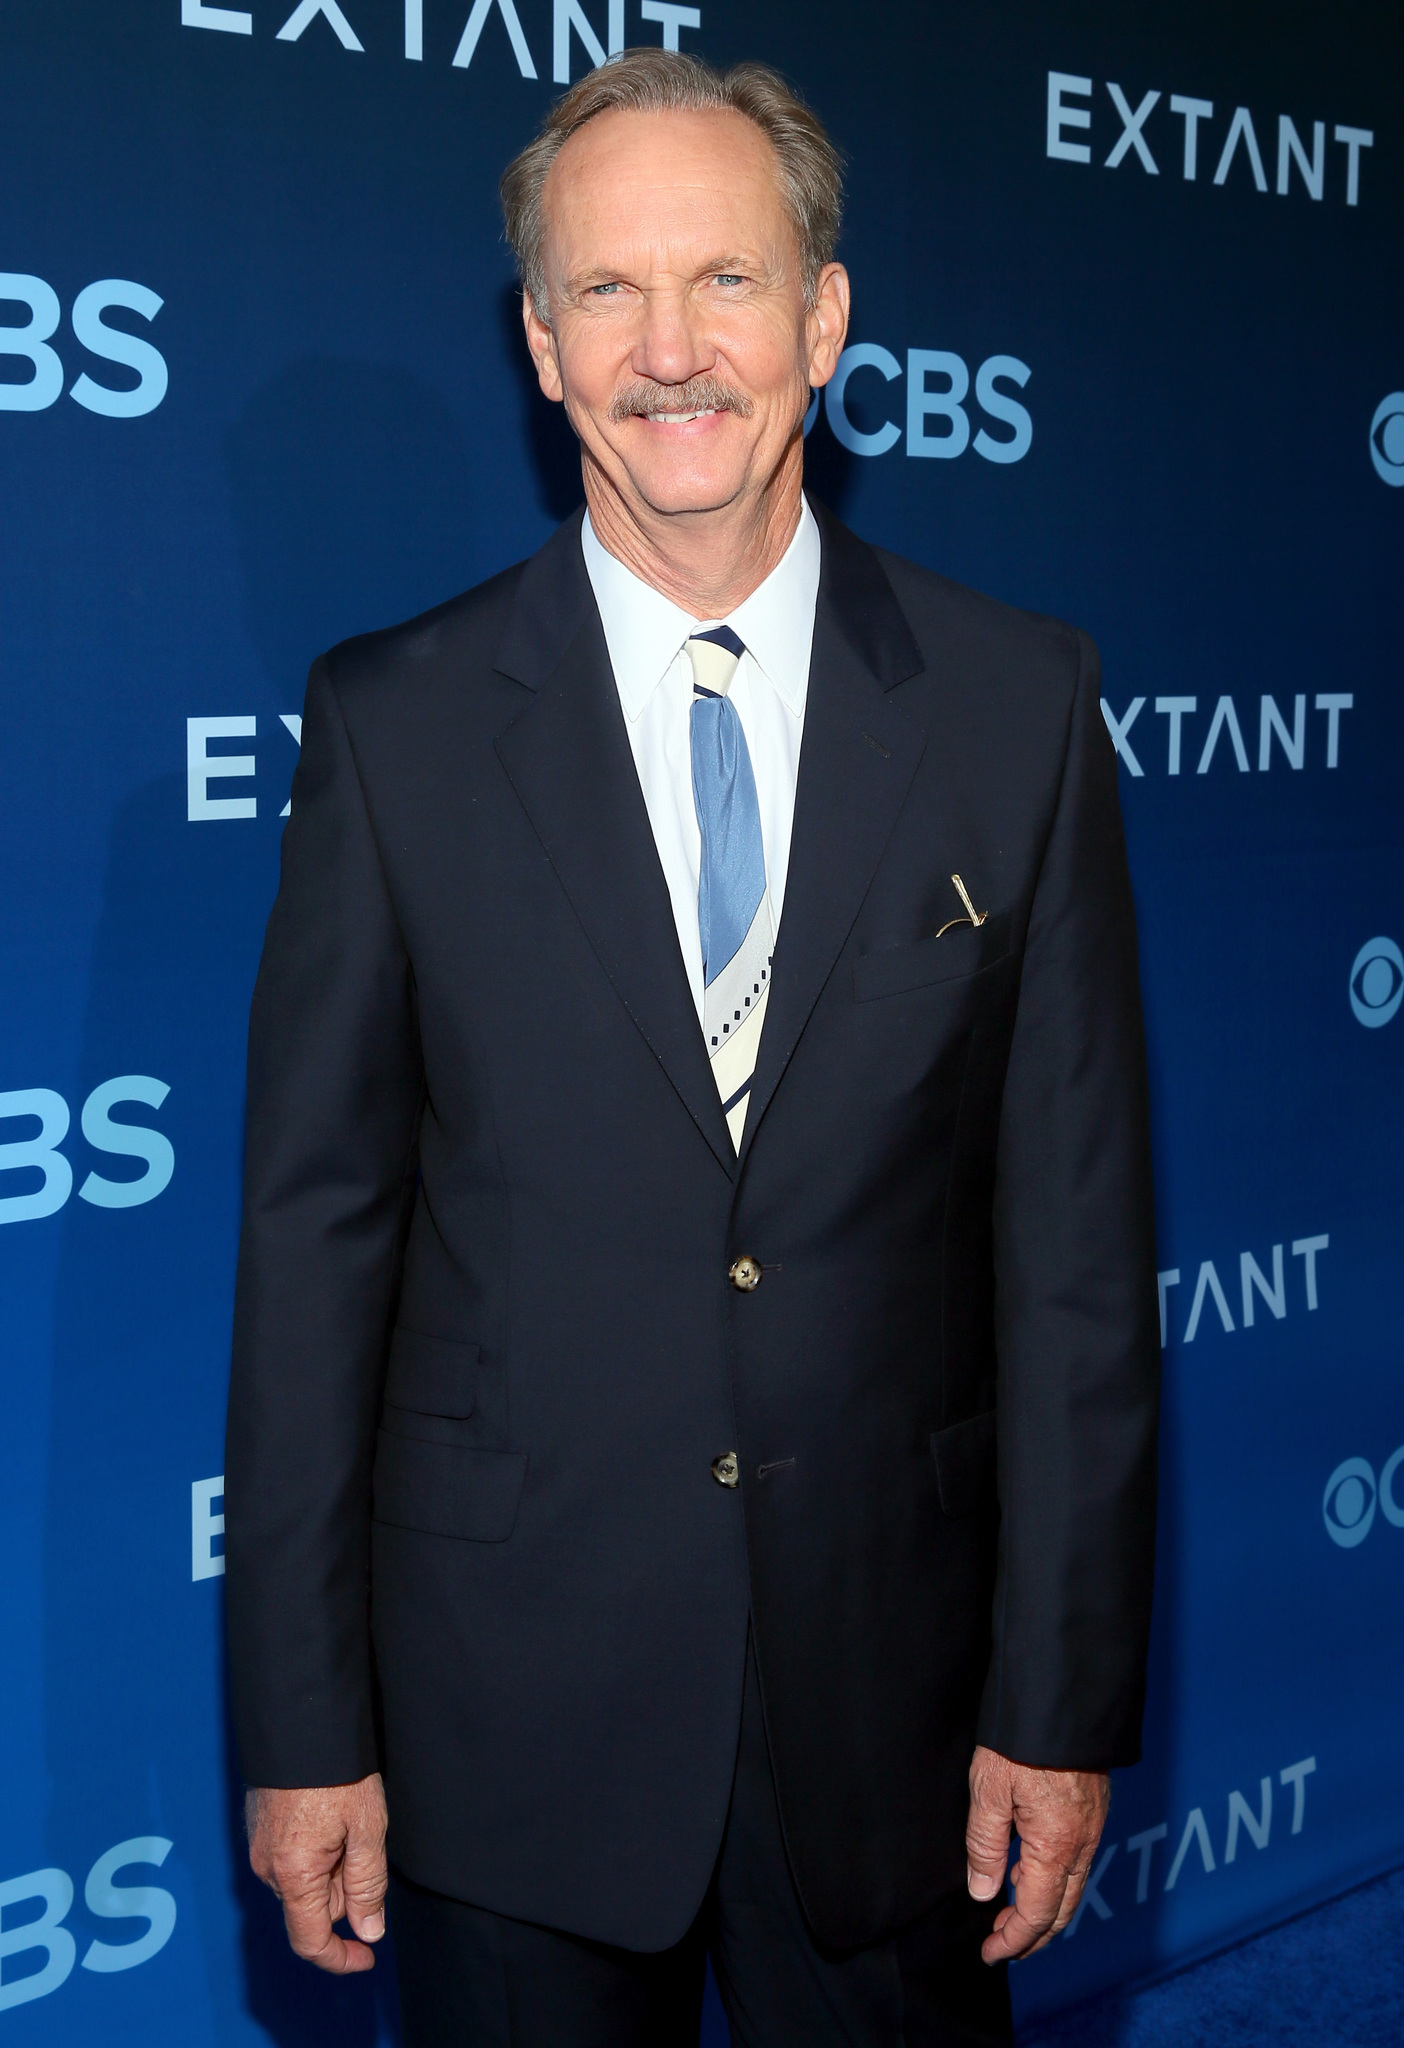 Michael O'Neill at event of Extant (2014)